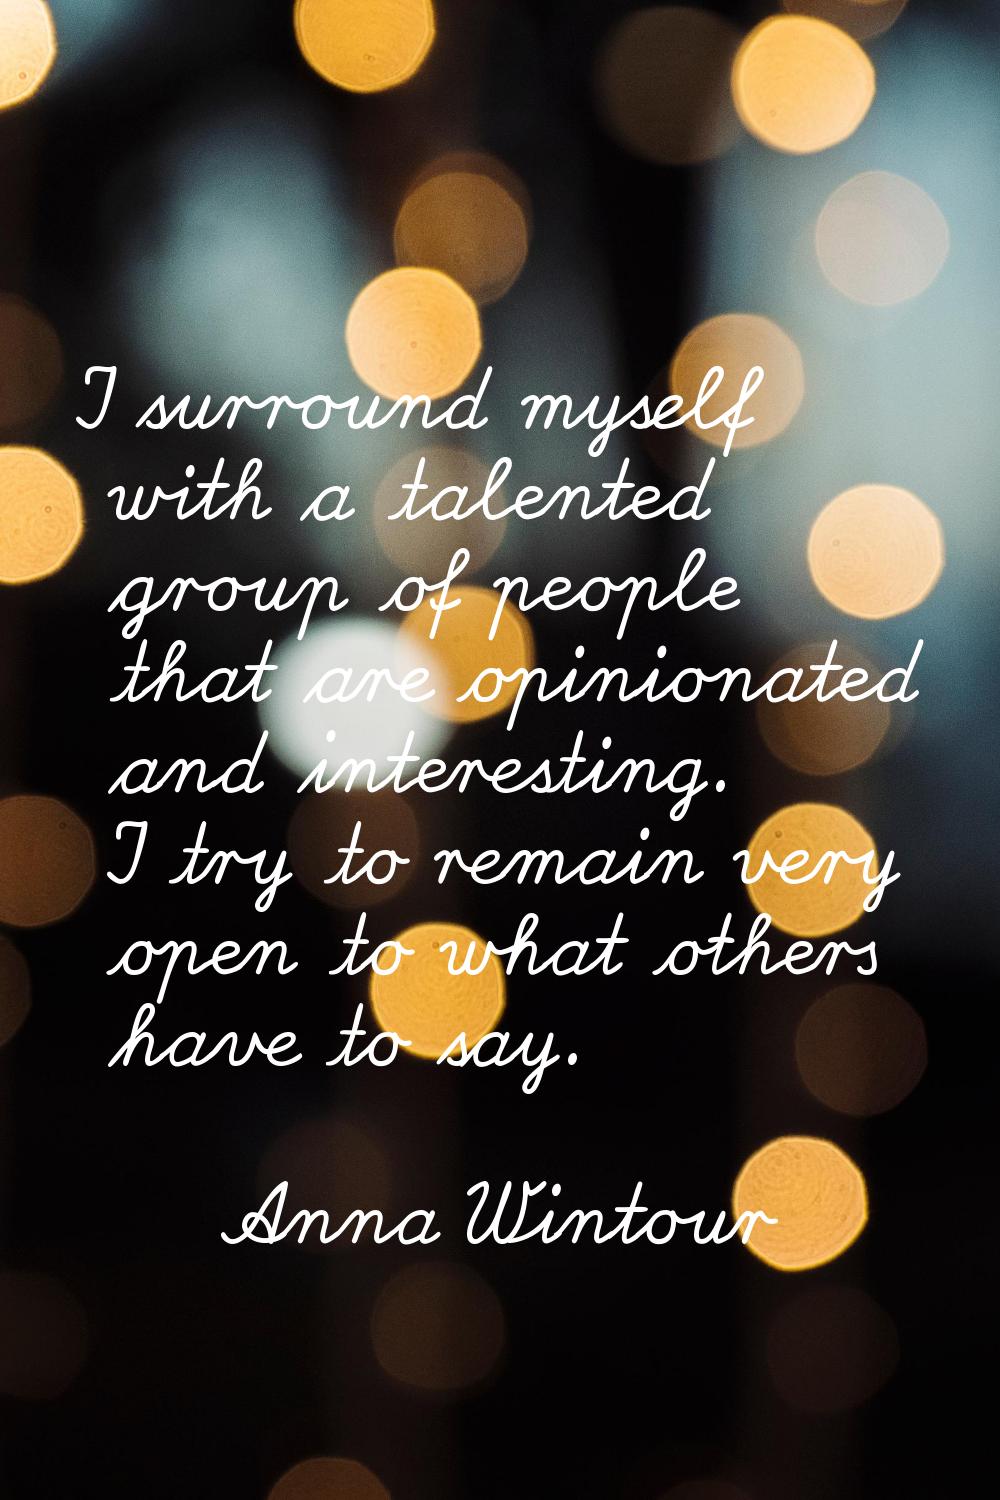 I surround myself with a talented group of people that are opinionated and interesting. I try to re